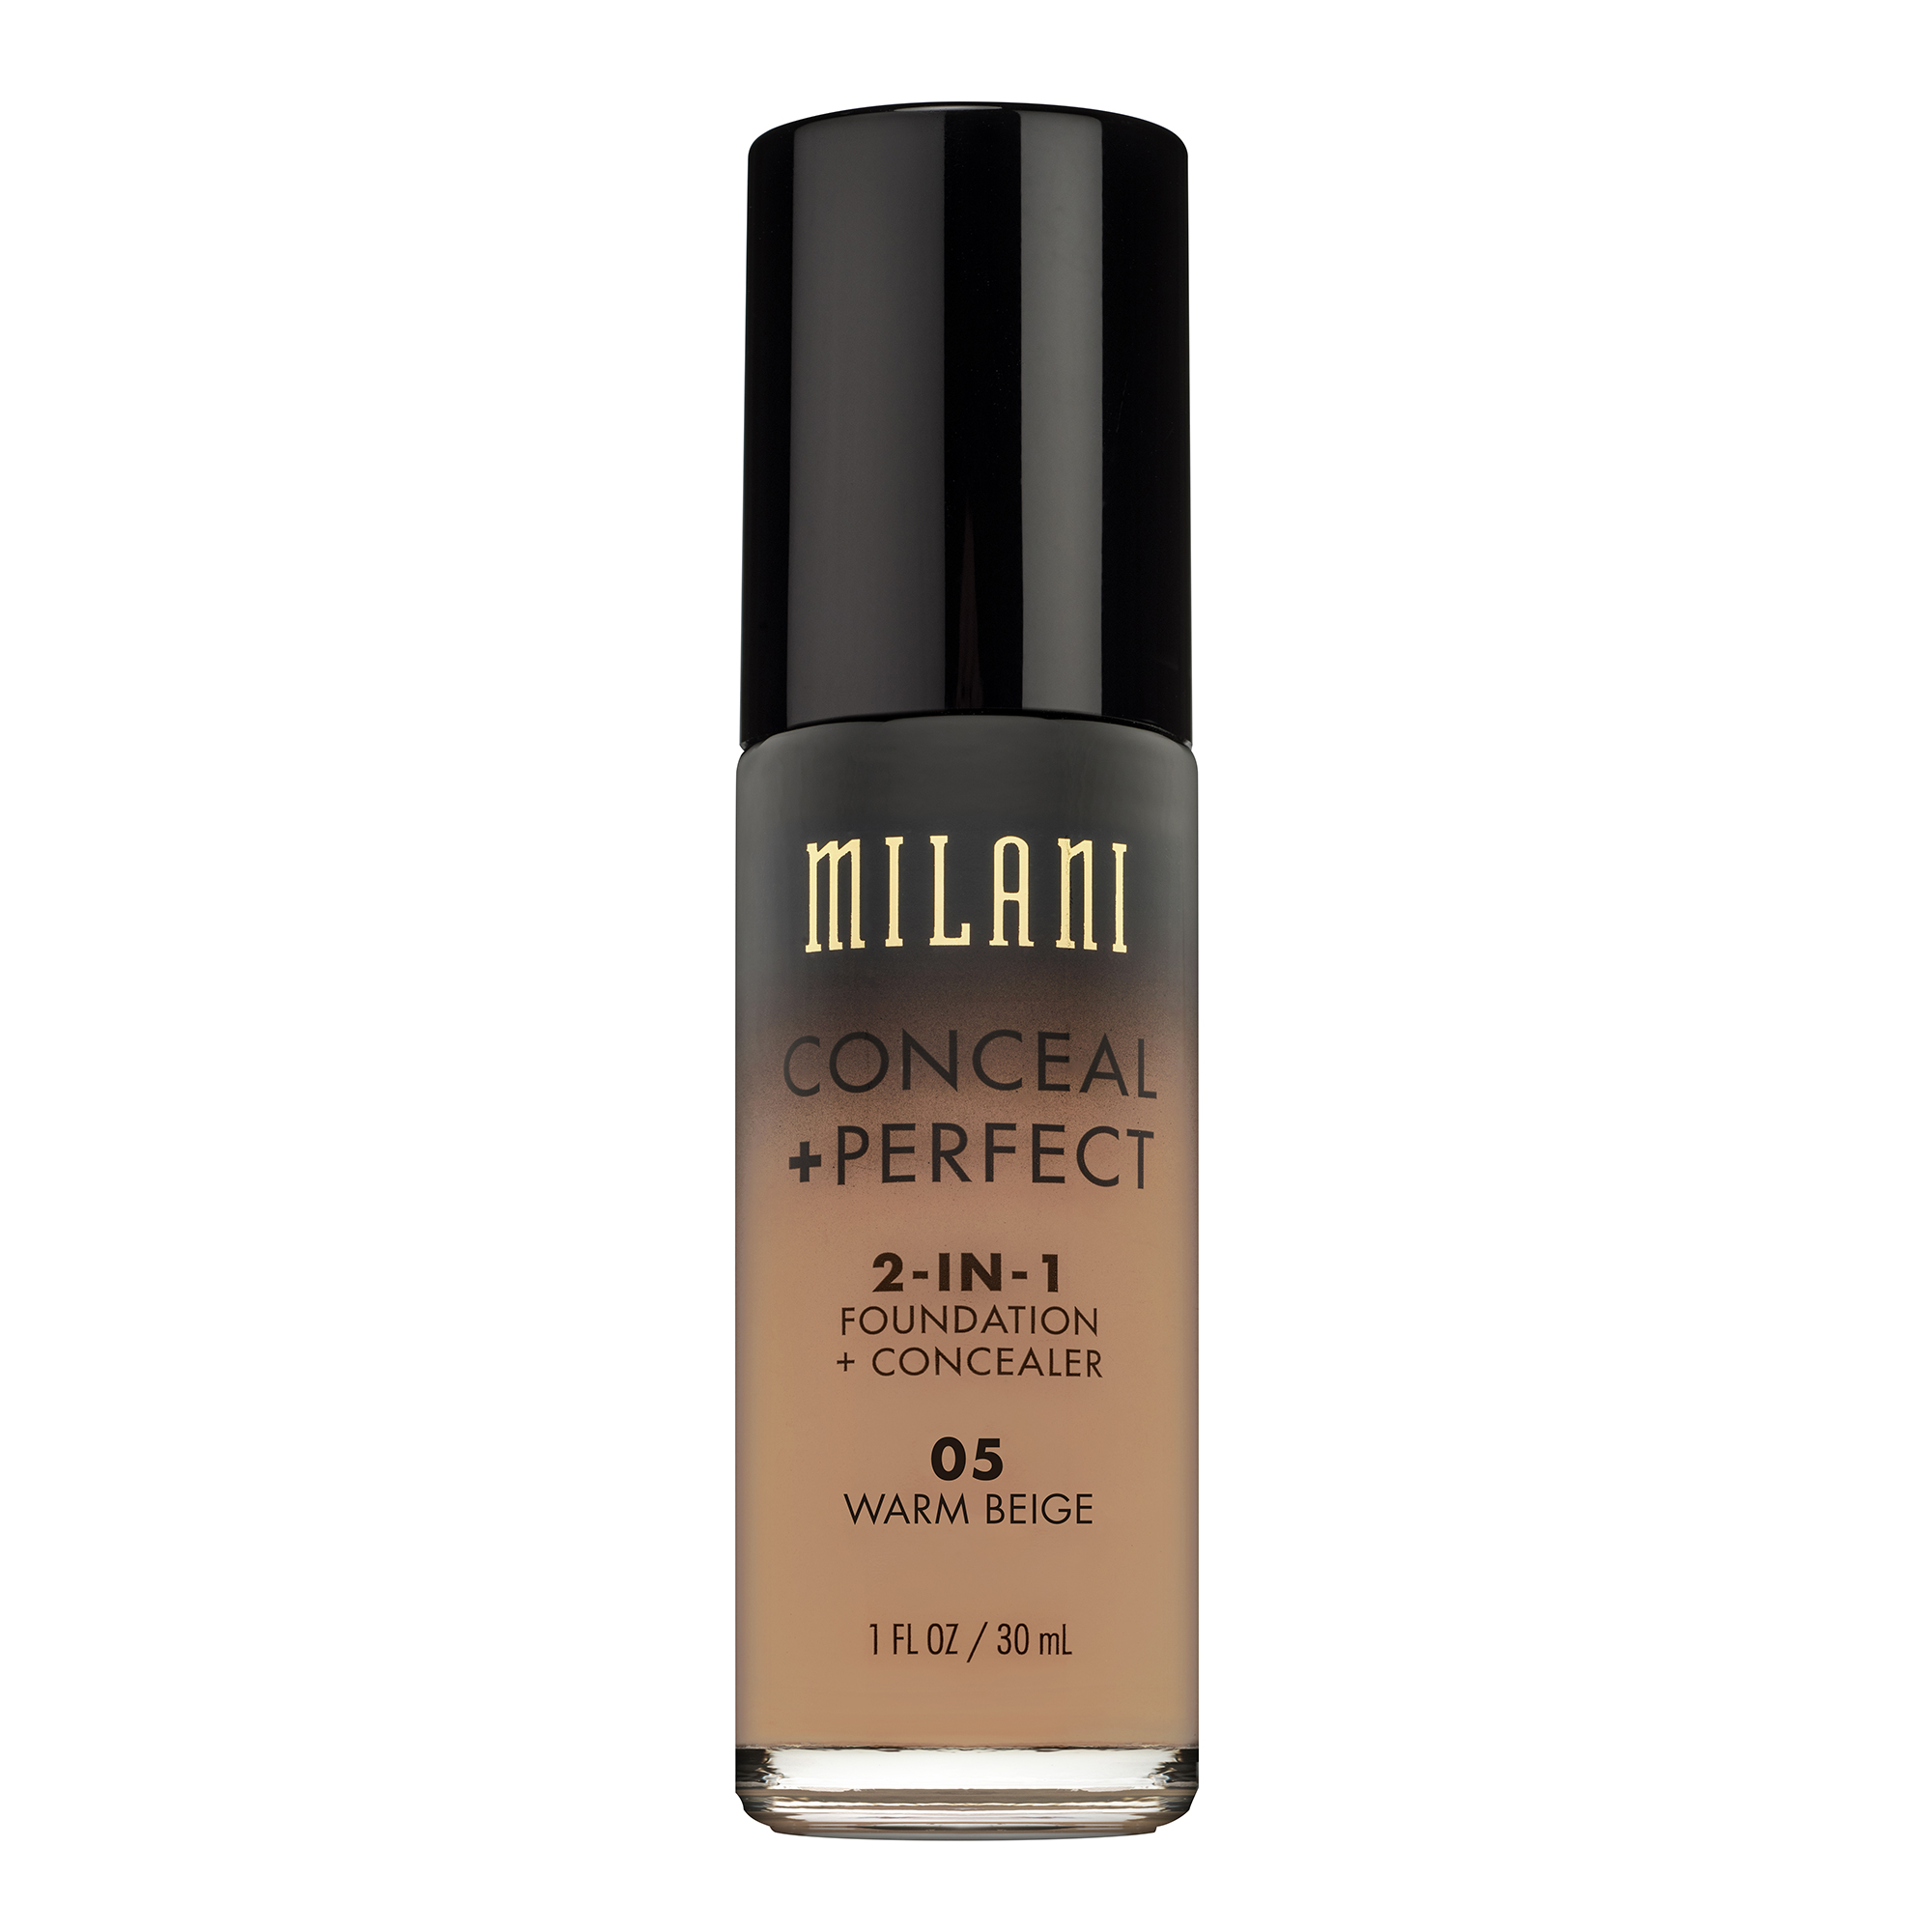 Milani Conceal + Perfect 2-in-1 Foundation + Concealer, Warm Beige - image 1 of 8